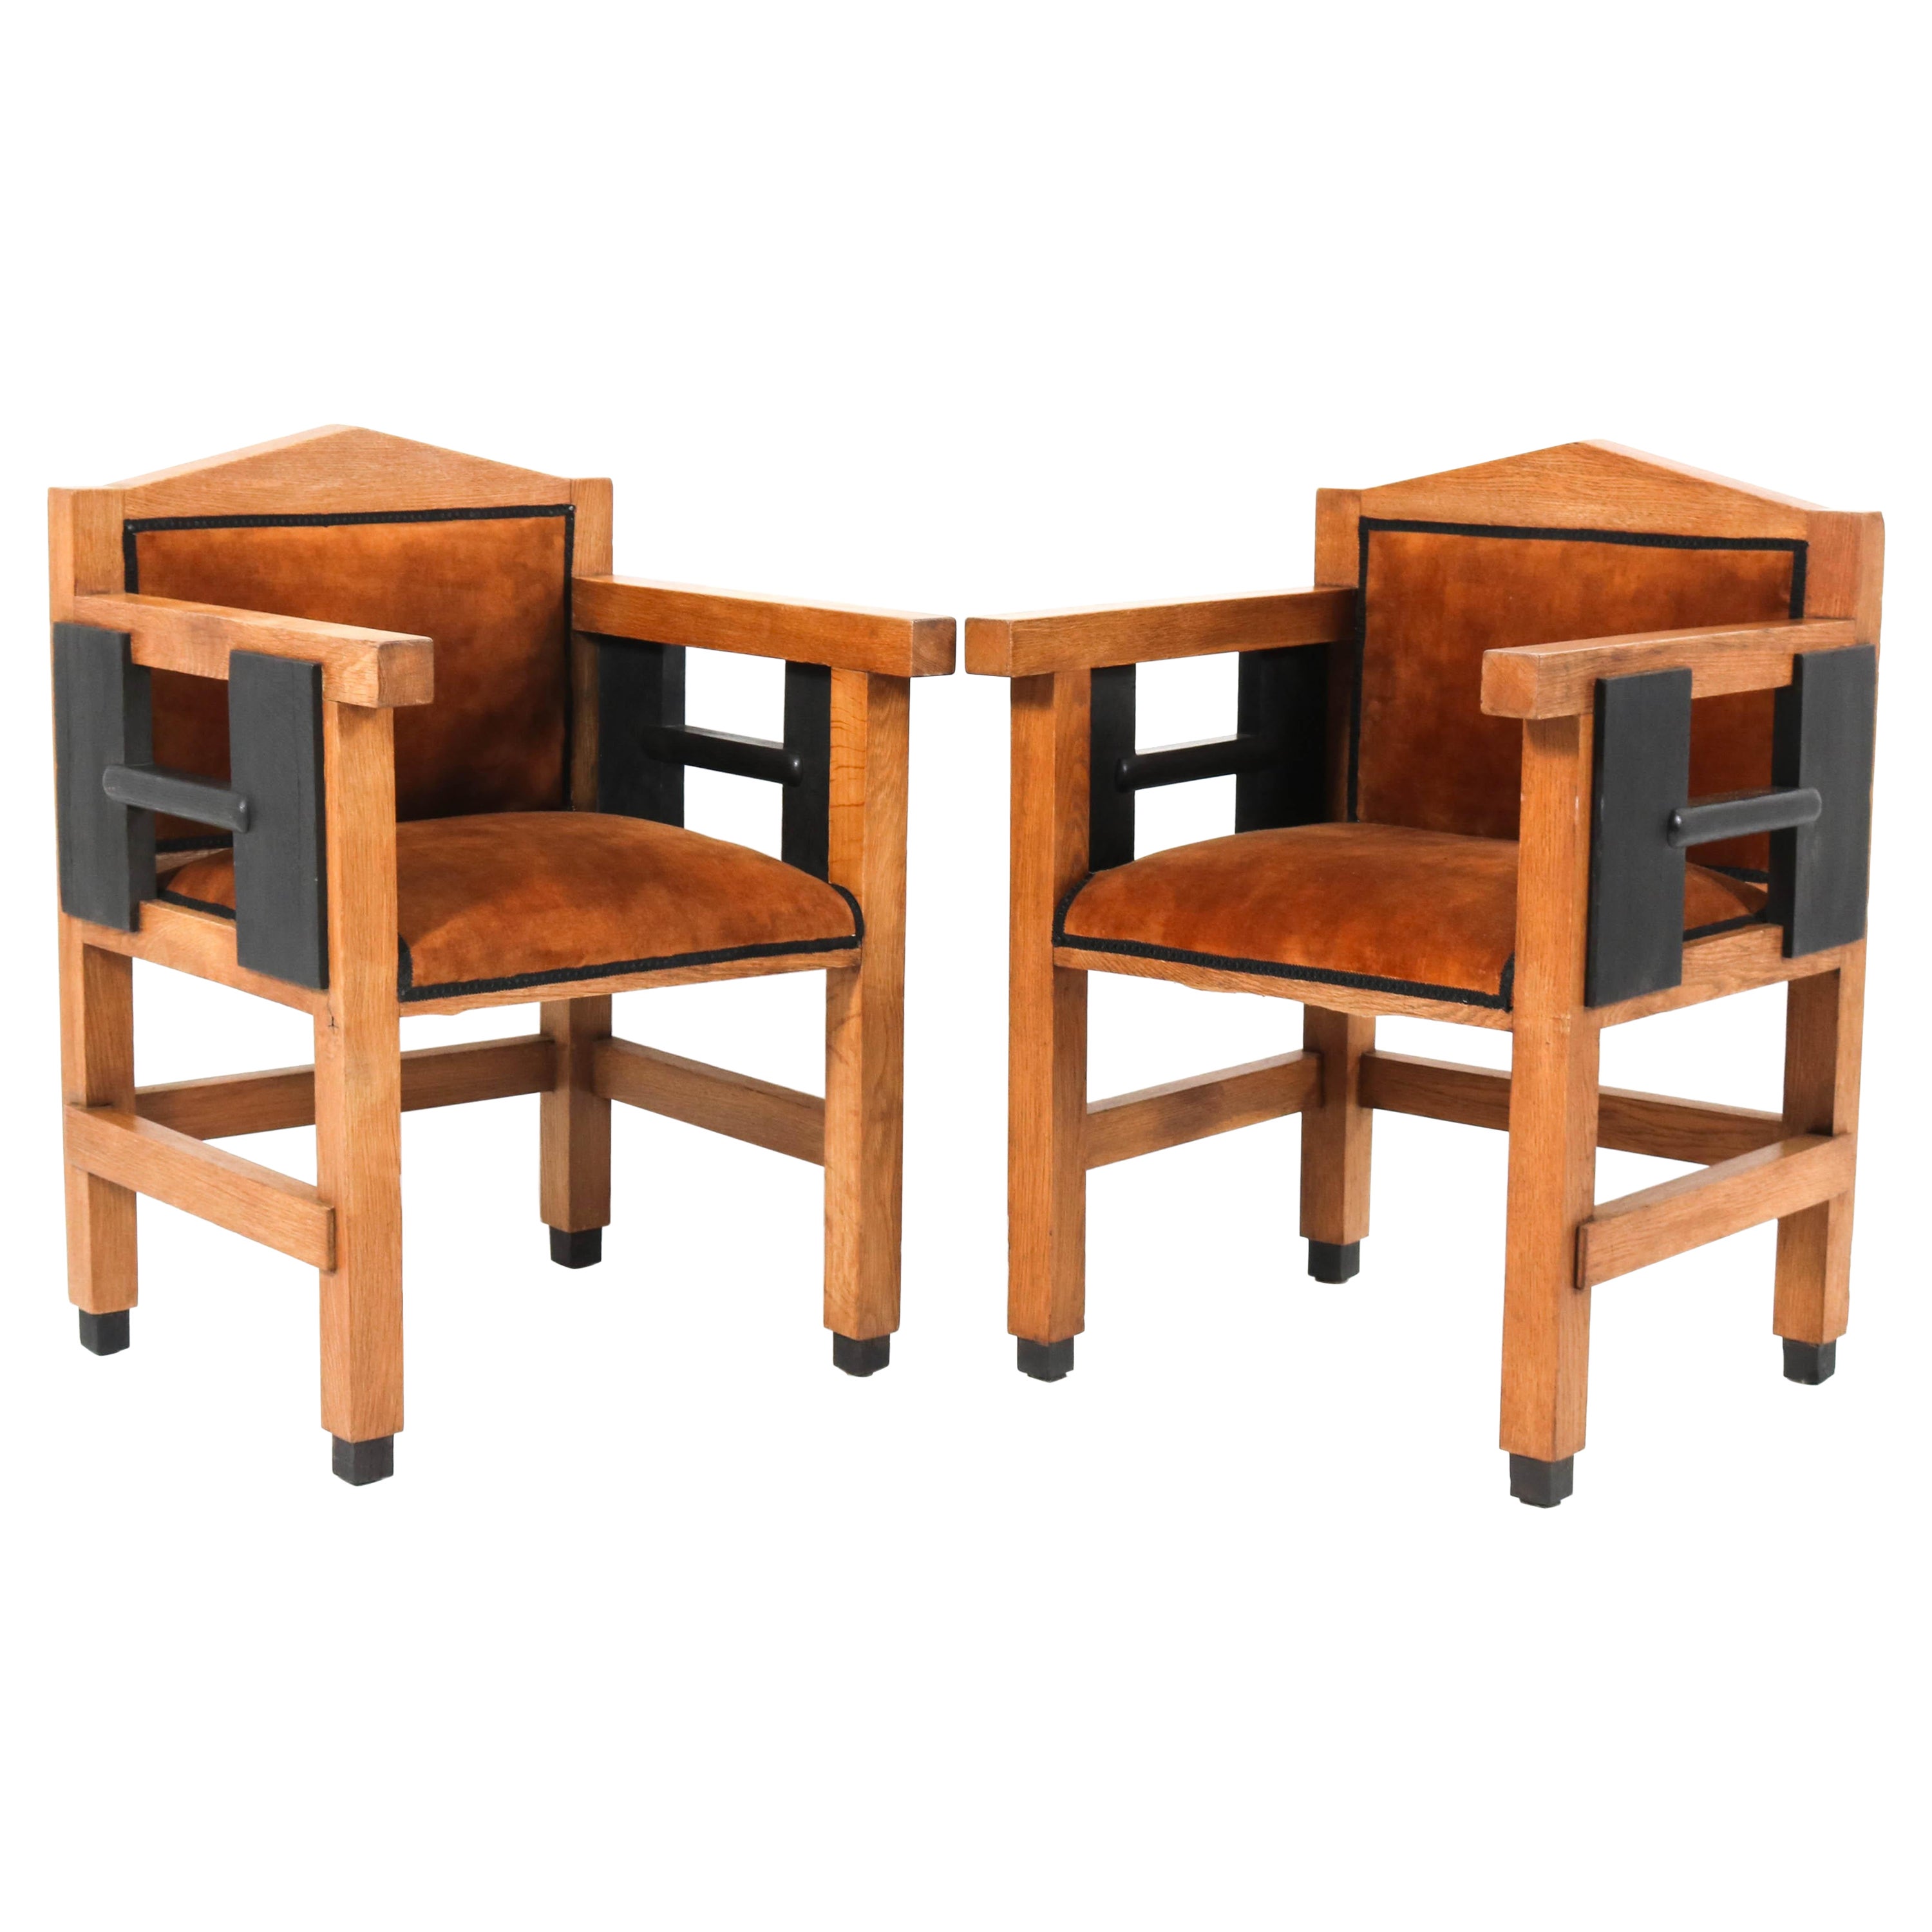 Two Oak Art Deco Haagse School Armchairs by Jacques Grubben, 1930 For Sale